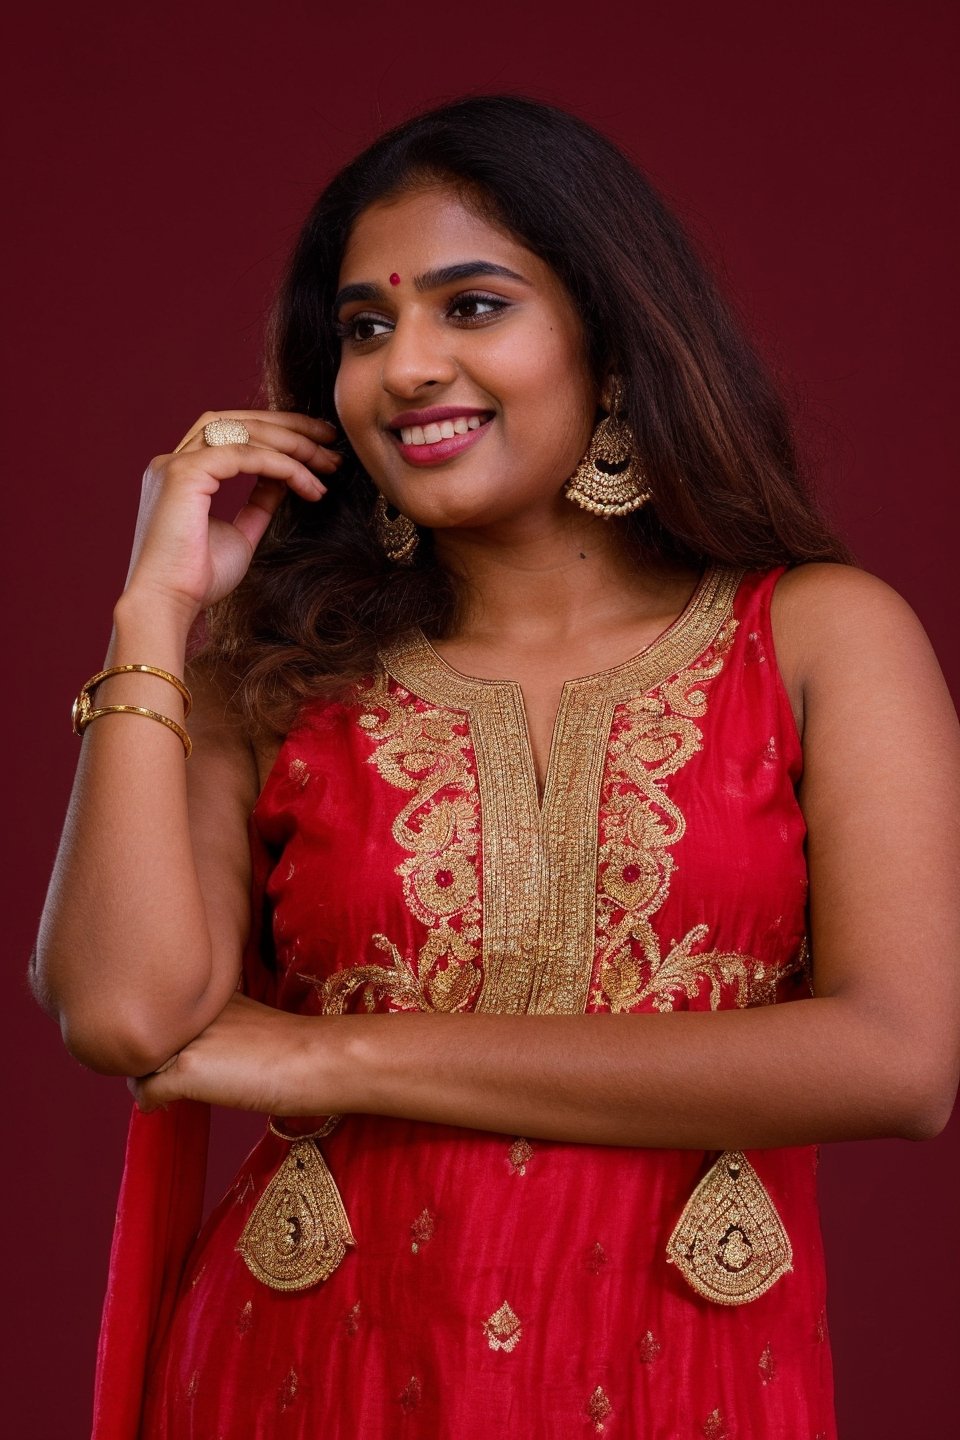 20 year old indian woman,  thick waist, long curly brown hair, gold jewels, front view, movie scene, cinematic, high-quality, ultra-detailed, professionally color graded, professional photography.  ( hard light:1.2), (volumetric:1.2), well-lit, double exposure, award-winning photograph, dramatic lighting, dramatic shadows, illumination, long shot, wide shot, full body, at studio, smart watch on left hand, happy_face, Fast shutter speed, 1/1000 sec shutter, golden_jewelry, embroidered traditional indian dress, , salwar, red cloth, sleeveless, dark background